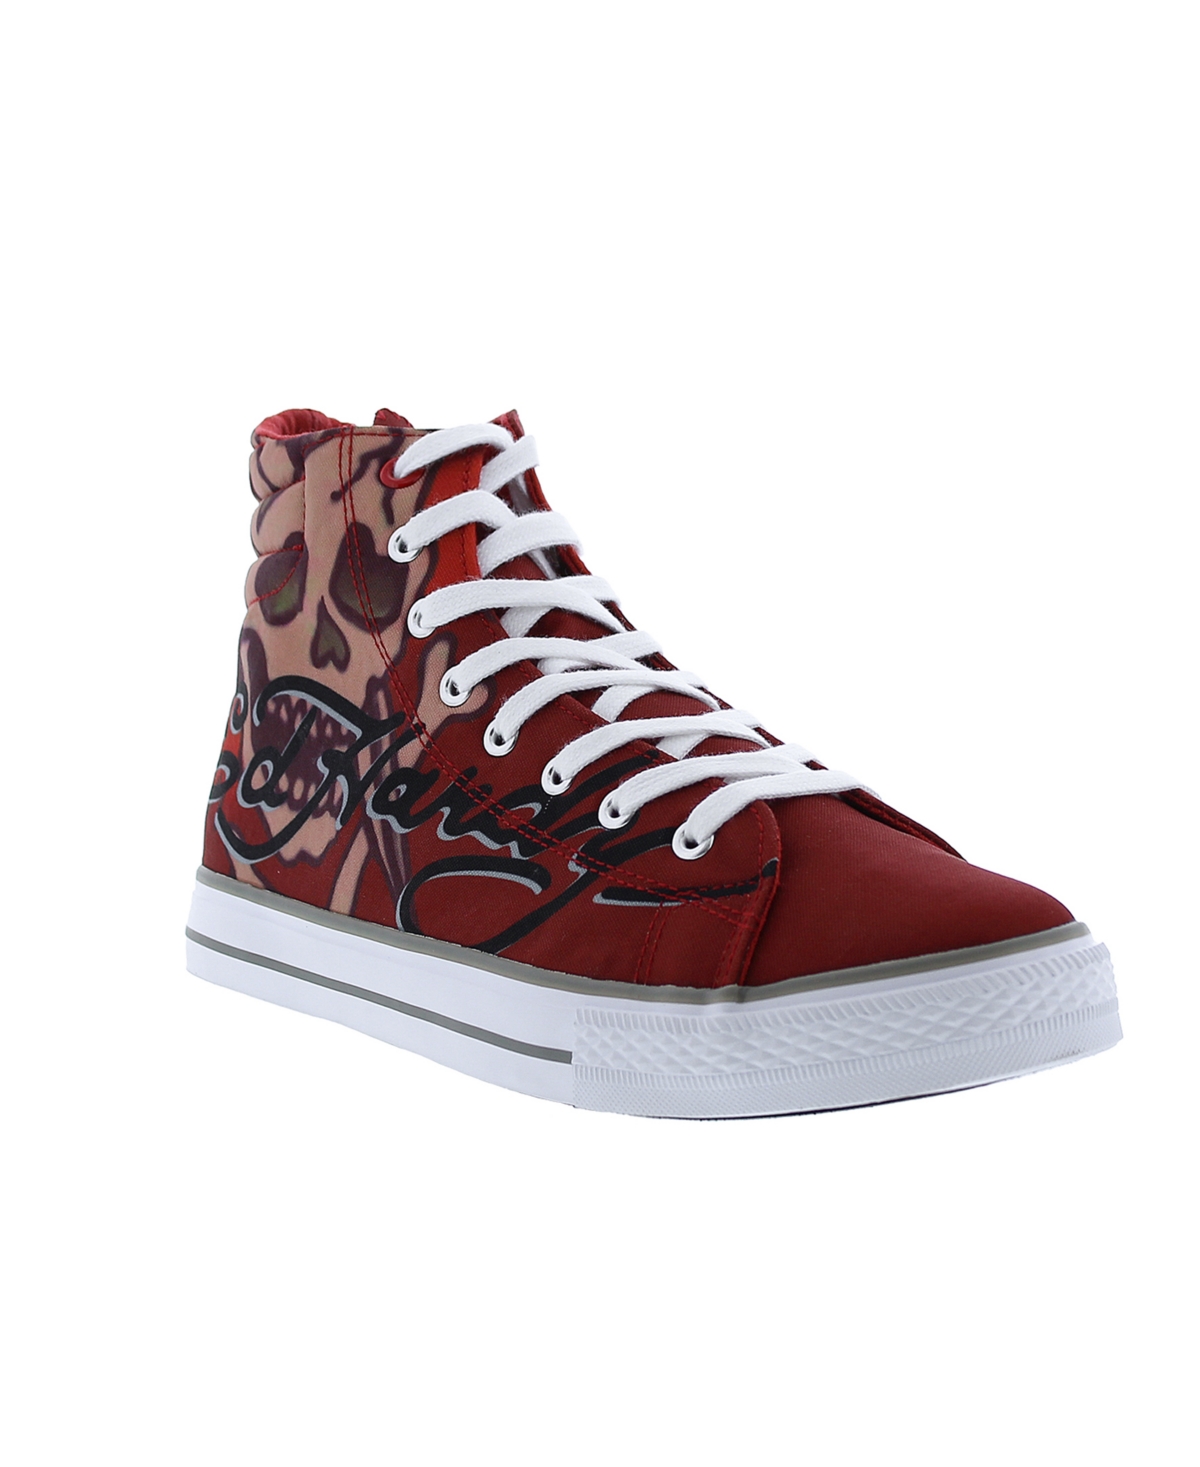 Ed Hardy Men's Tibby High Top Sneakers Men's Shoes